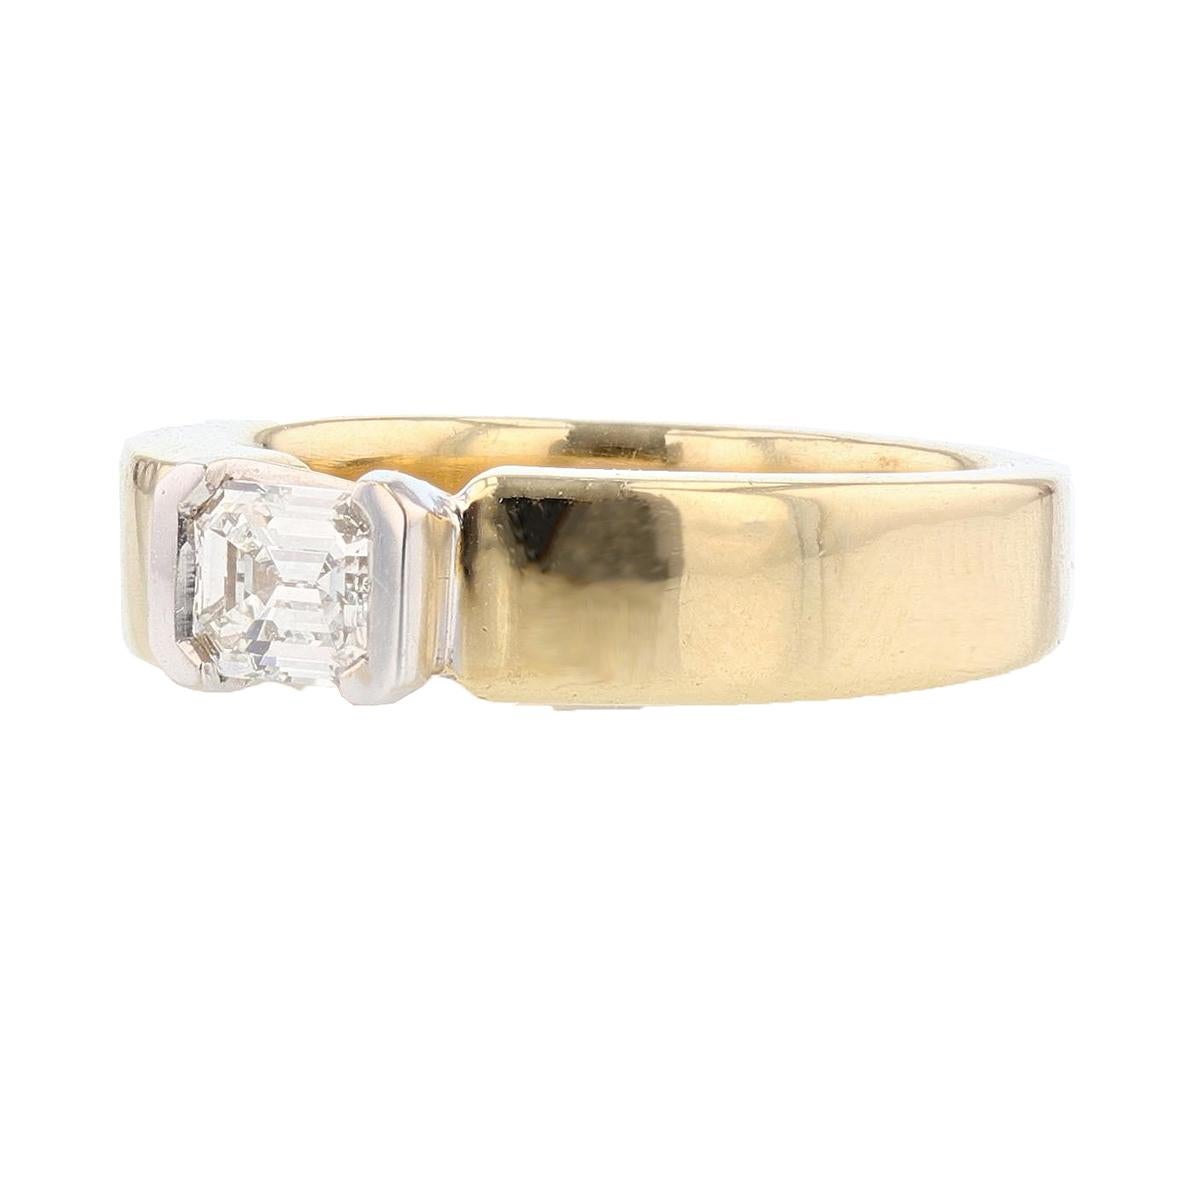 This ring is made with 14 karat yellow and white gold and features a bezel set 0.54ct  emerald cut diamond  with a color grade (I) and clarity grade (SI2). 